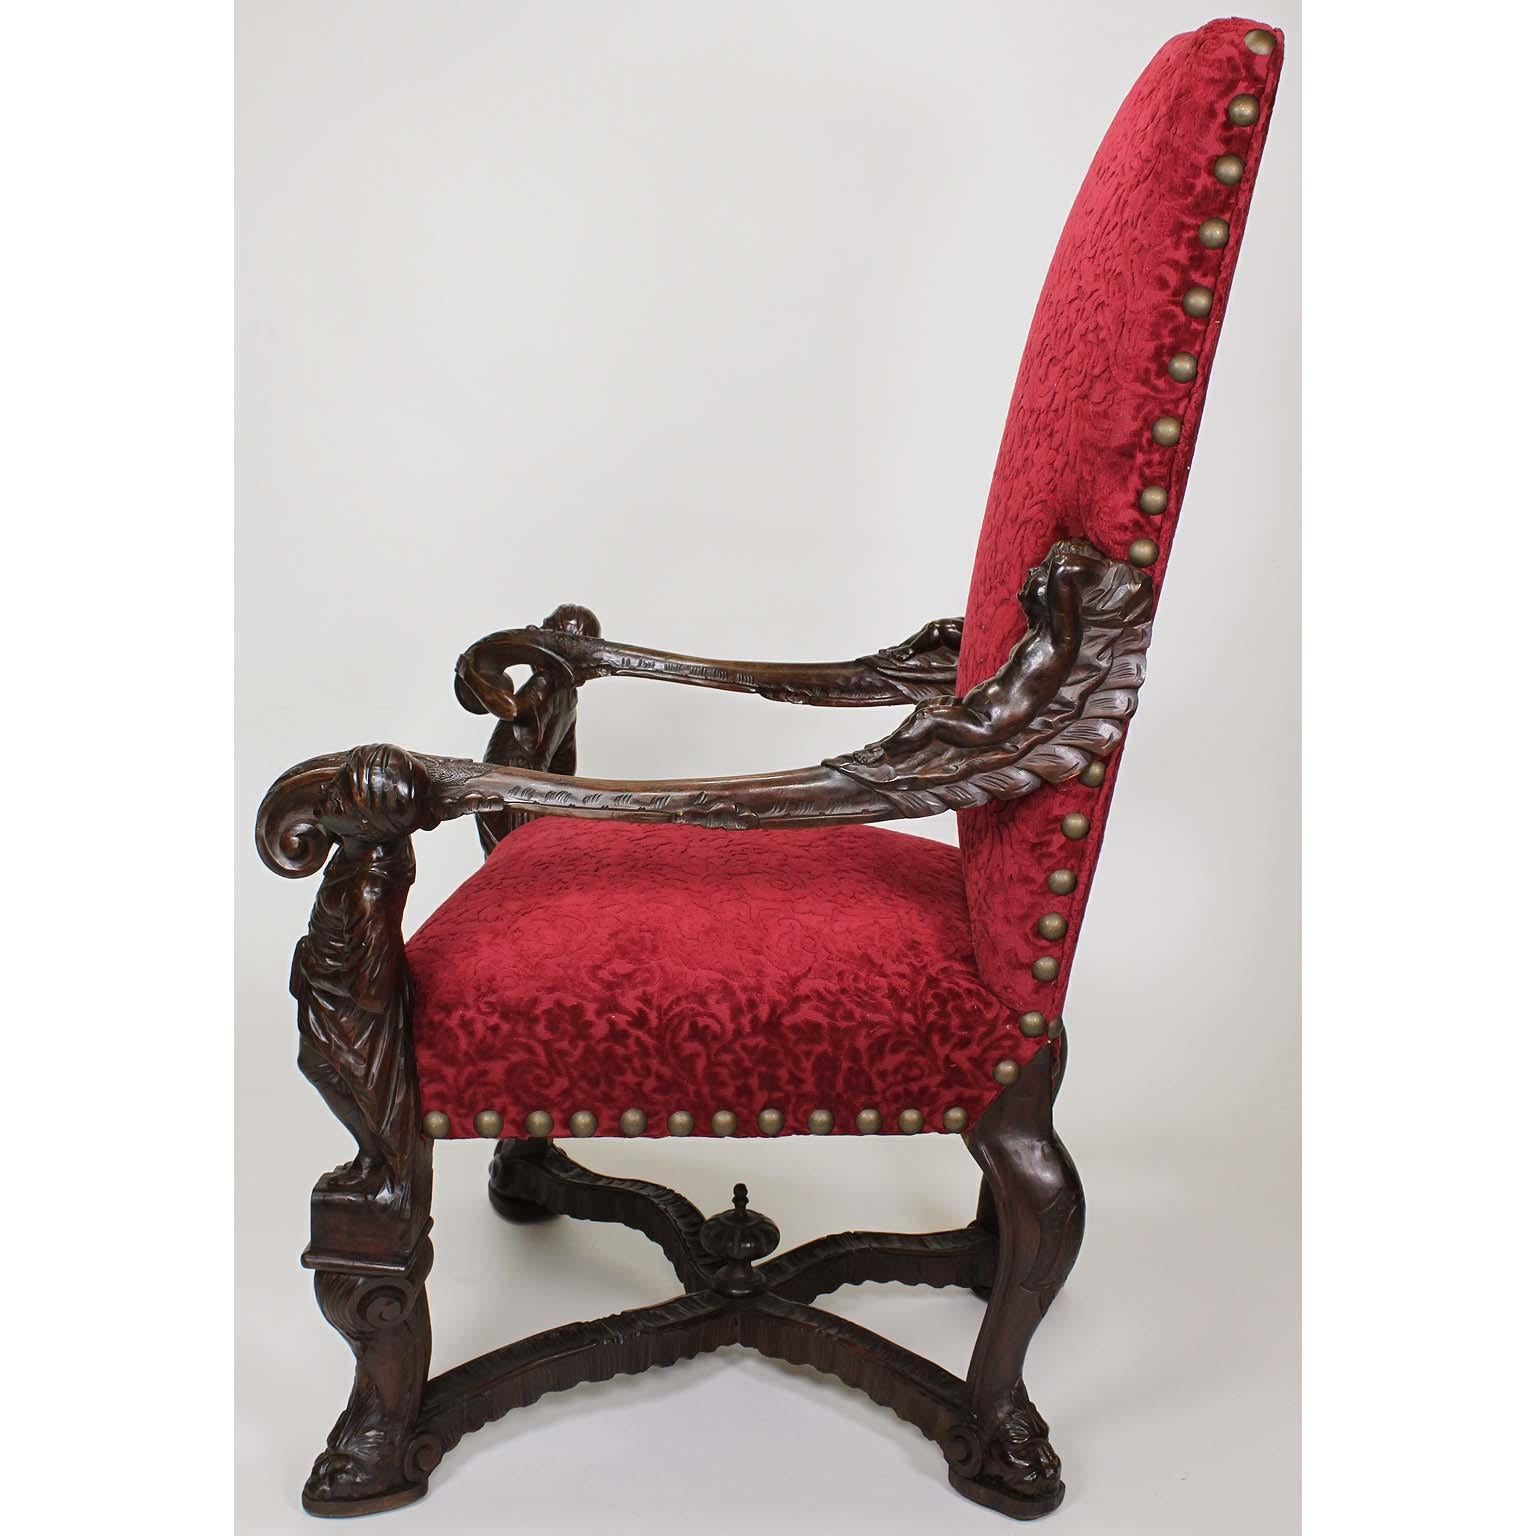 In Manner of Andrea Brustolon Venetian 19th Century Carved Walnut Figural Throne For Sale 4